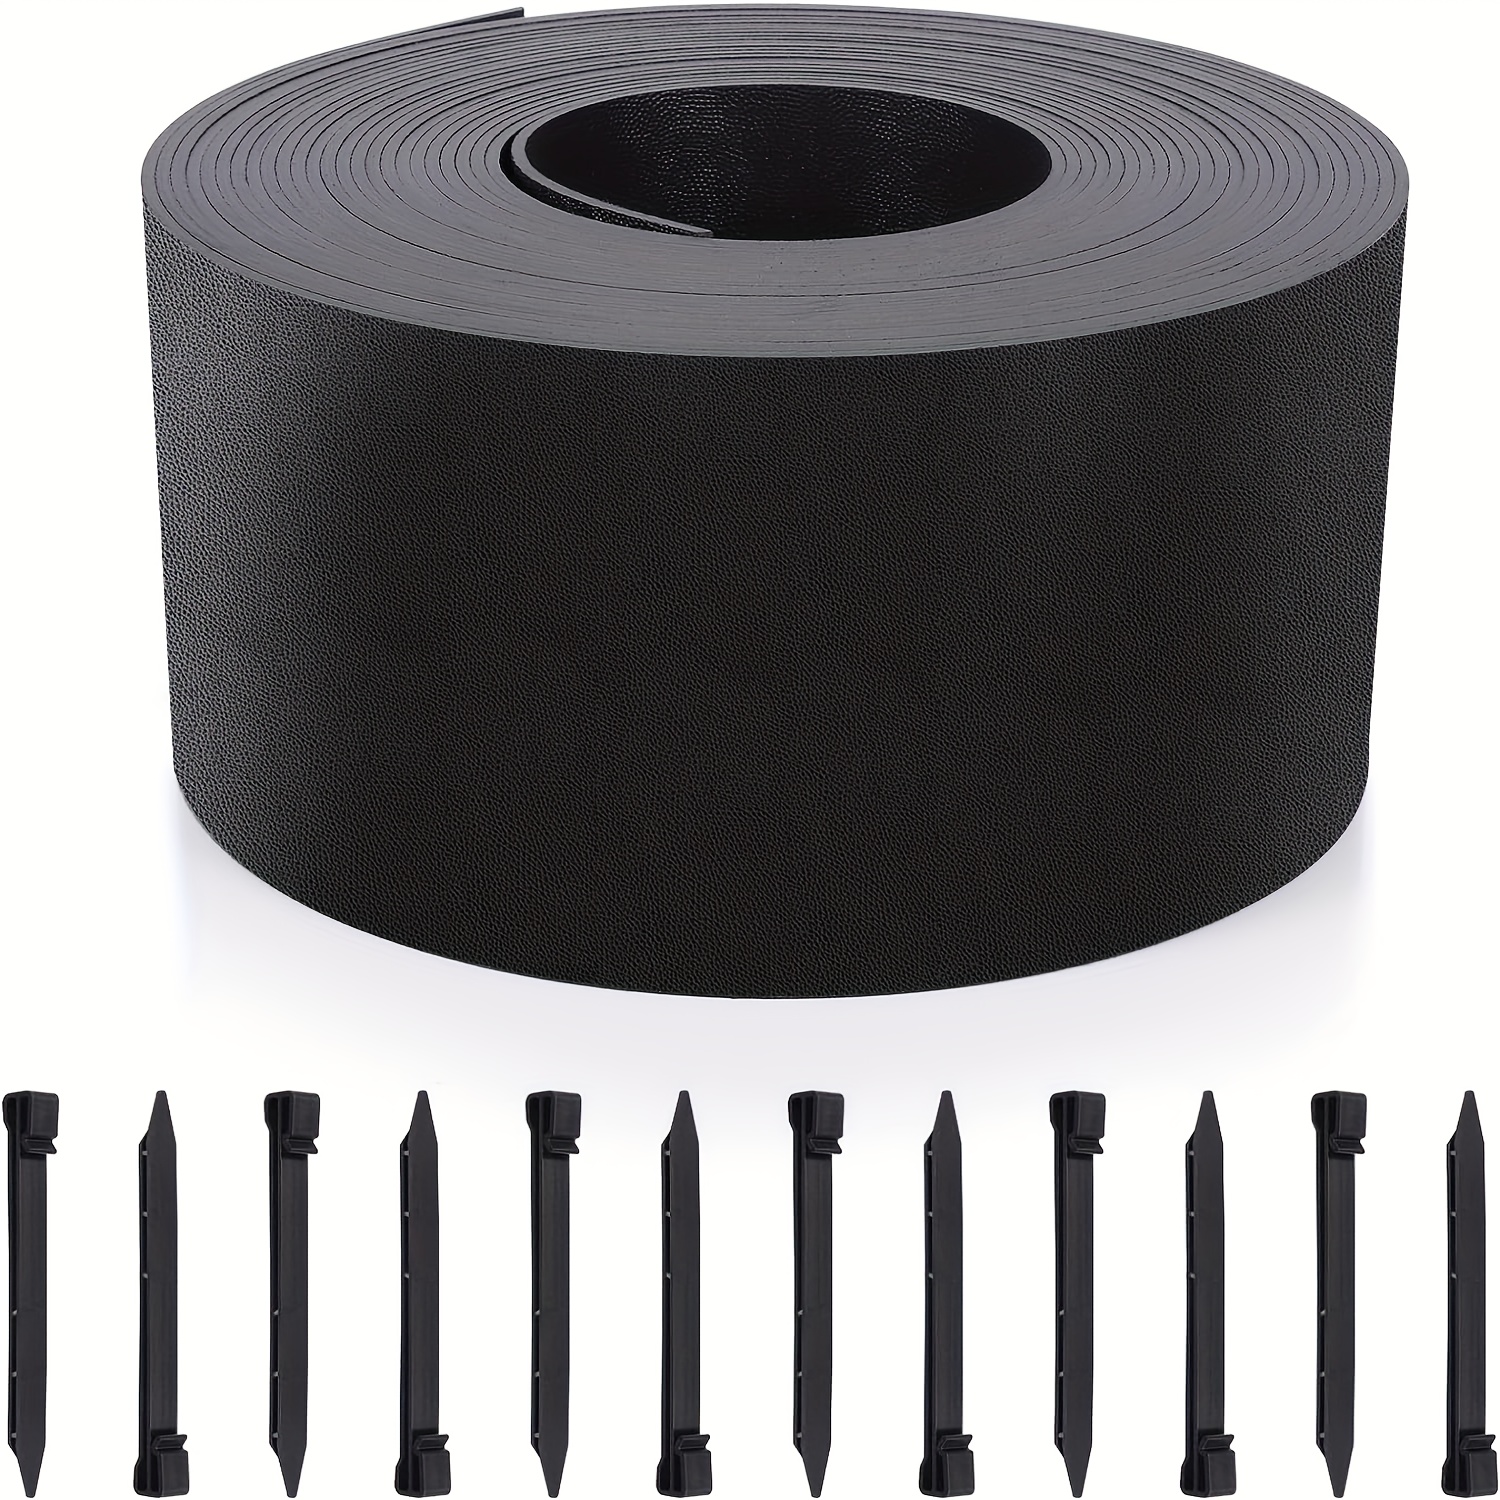 

Black Plastic Garden Landscape Edging, 5" Tall Border Coil, Flexible And Strengthened With Anti-uv Treatment (100ft With 30pcs Stakes)